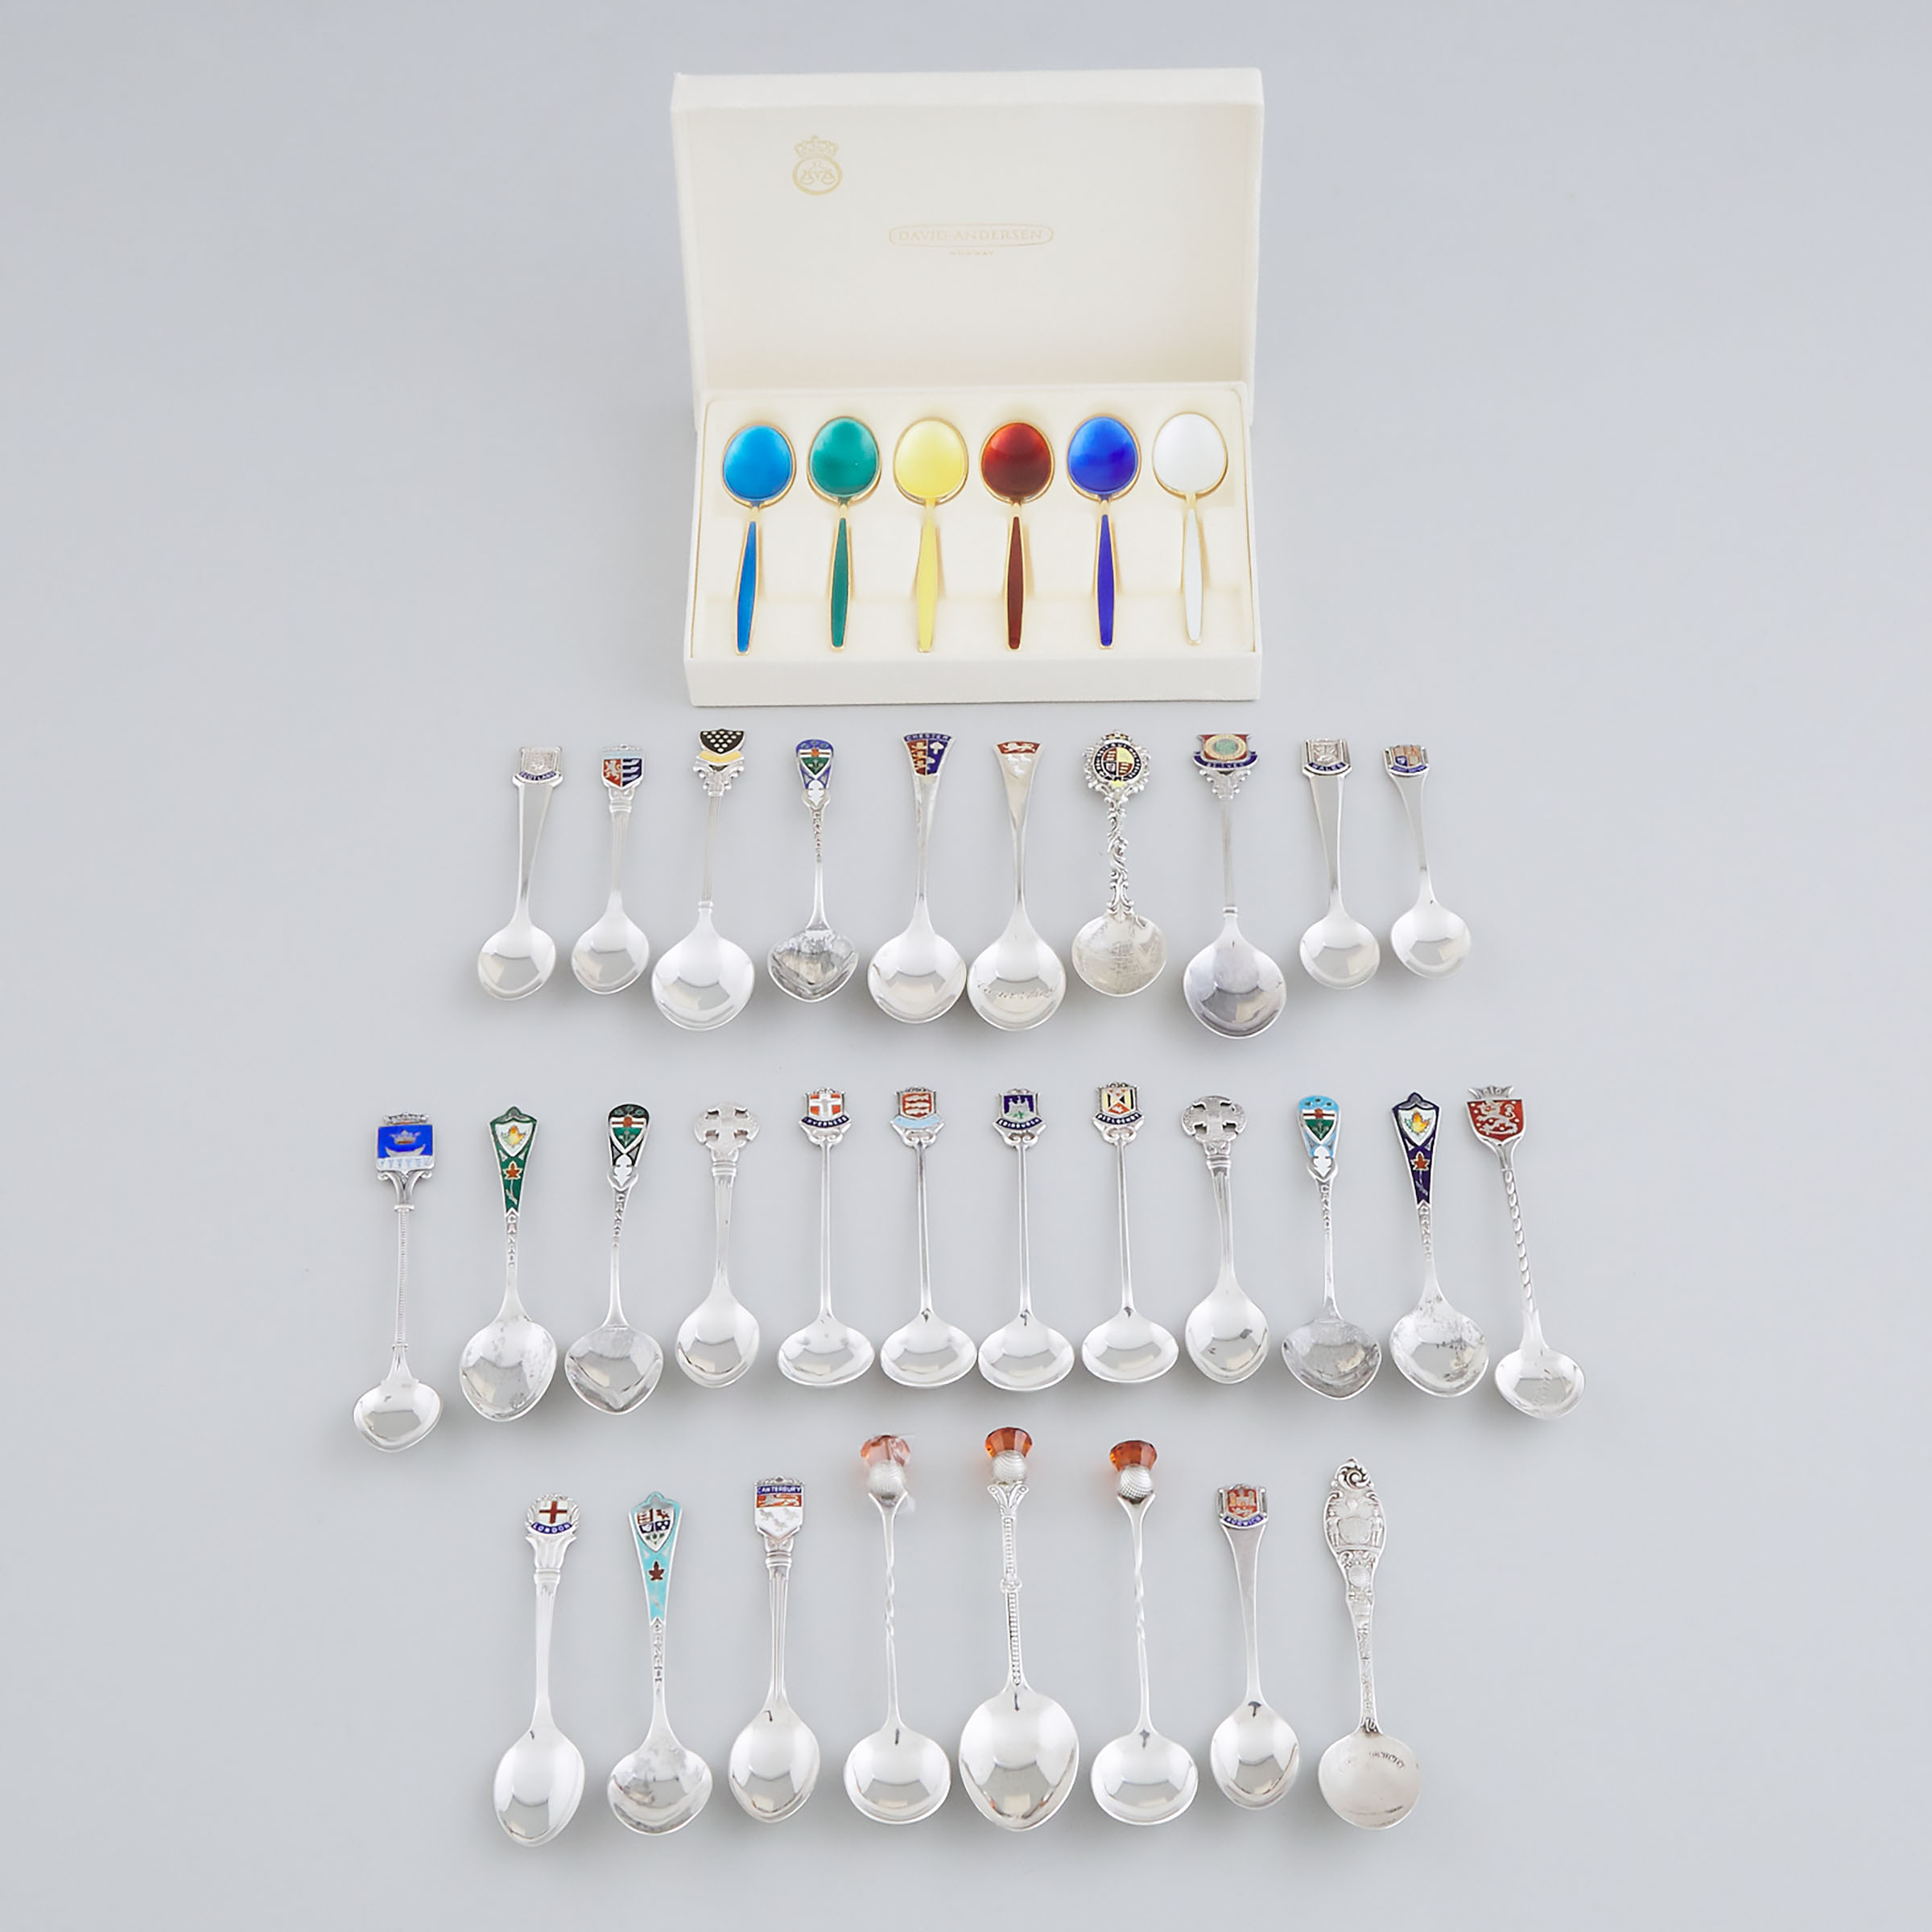 Thirty Mainly North American and English Silver Souvenir Spoons and Six Norwegian Enameled Silver-Gilt Coffee Spoons, 20th century